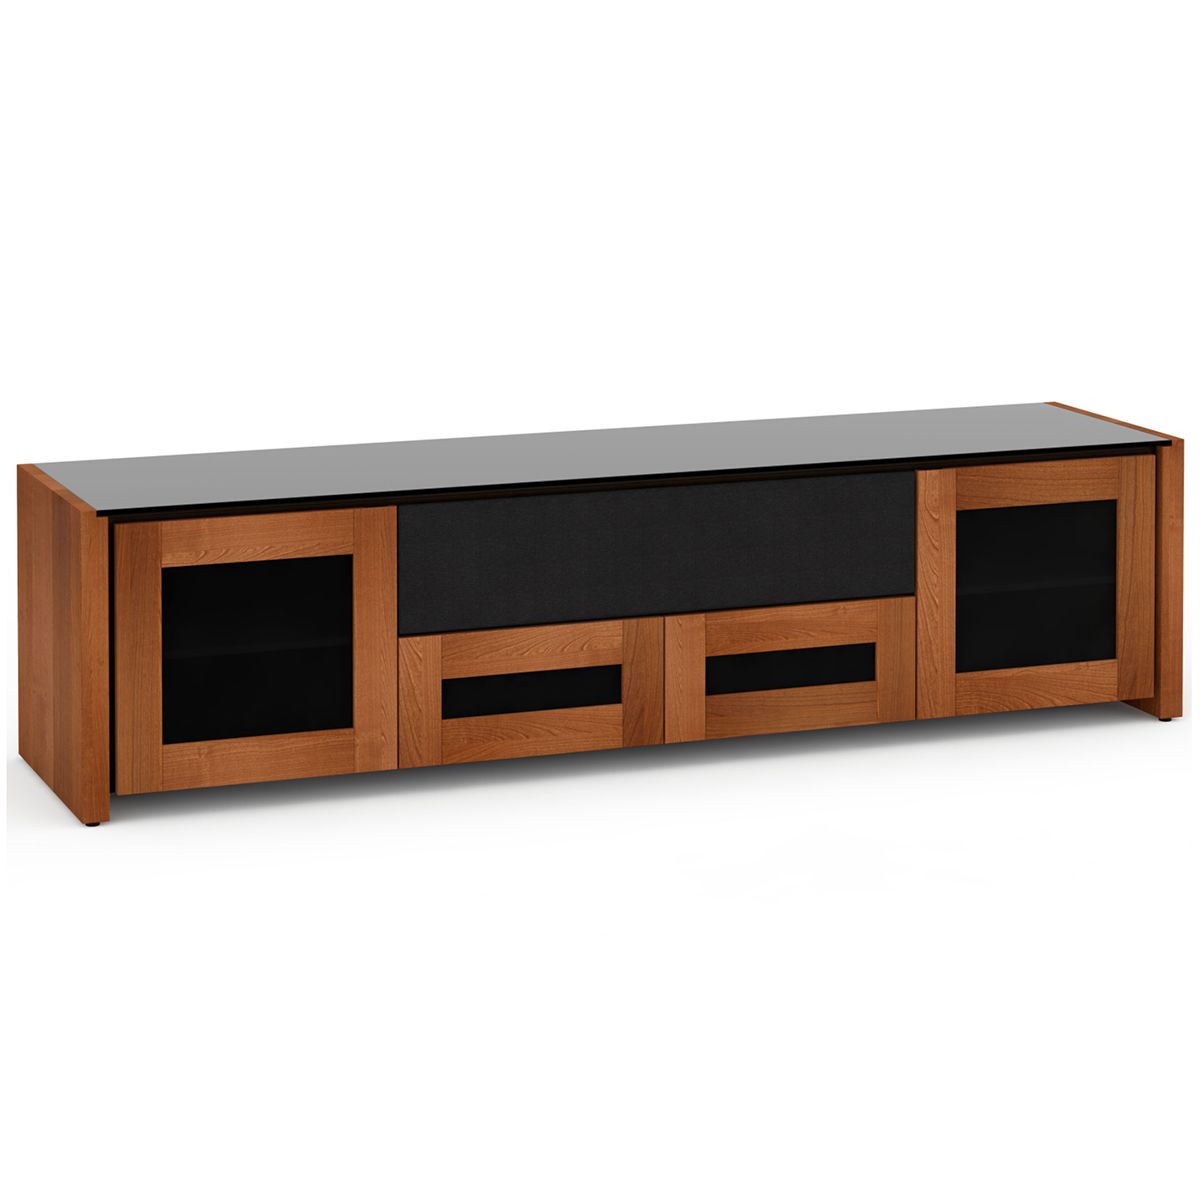 Salamander Designs Corsica 245 Quad-Width AV Cabinet with Center Speaker Opening- American Cherry- front view